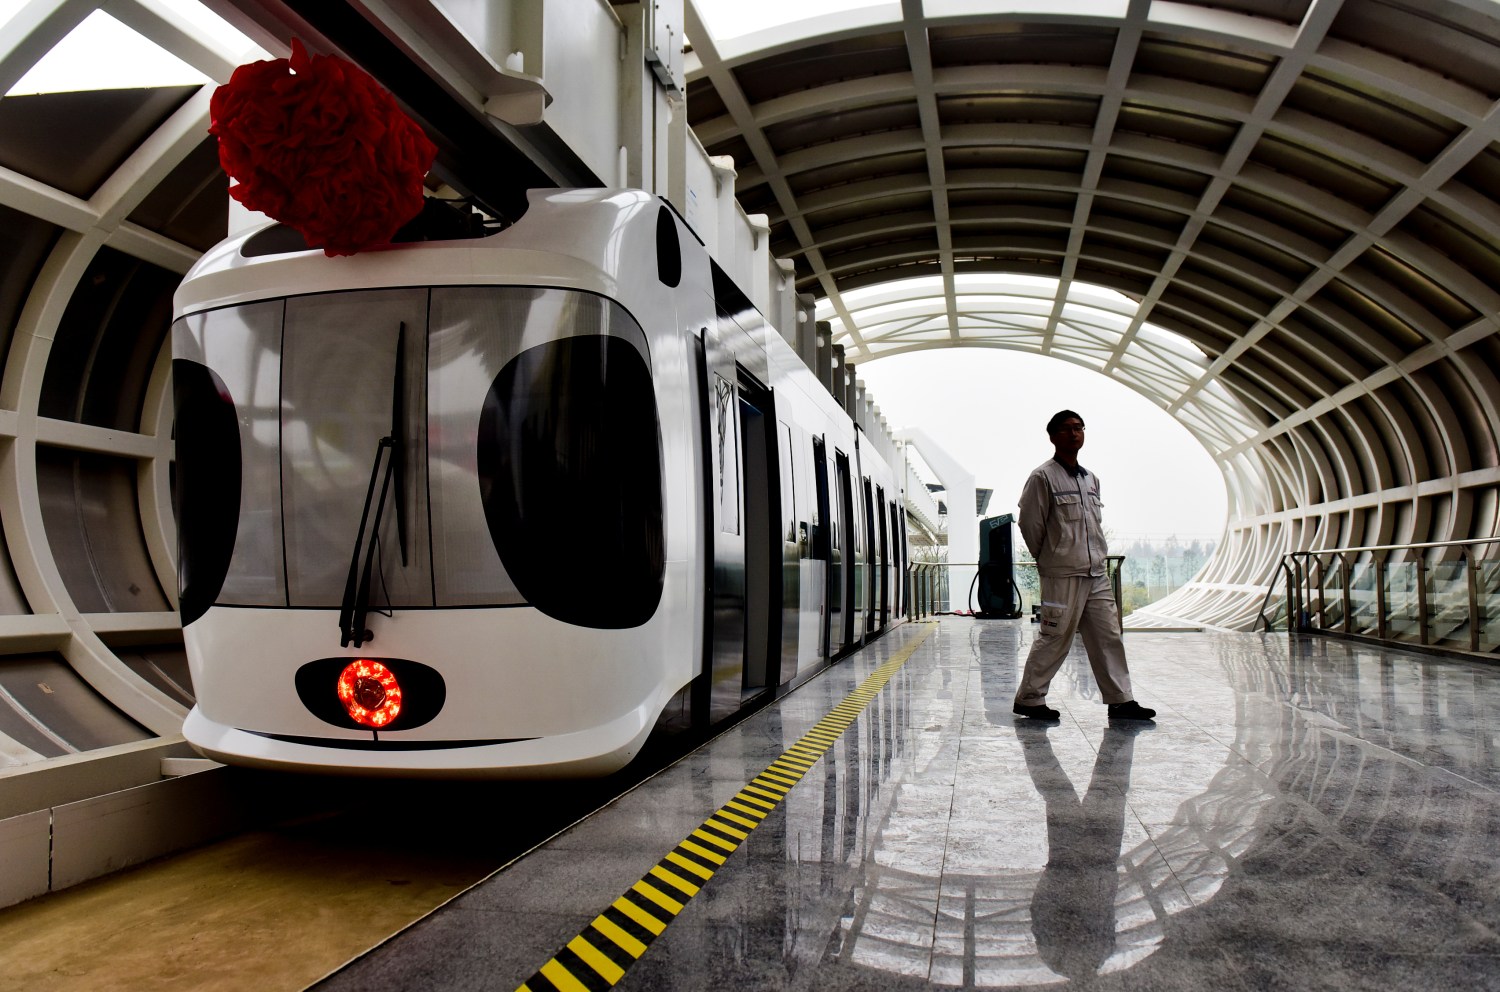 A test line of a new energy suspension railway resembling the giant panda is seen in Chengdu, Sichuan Province, China